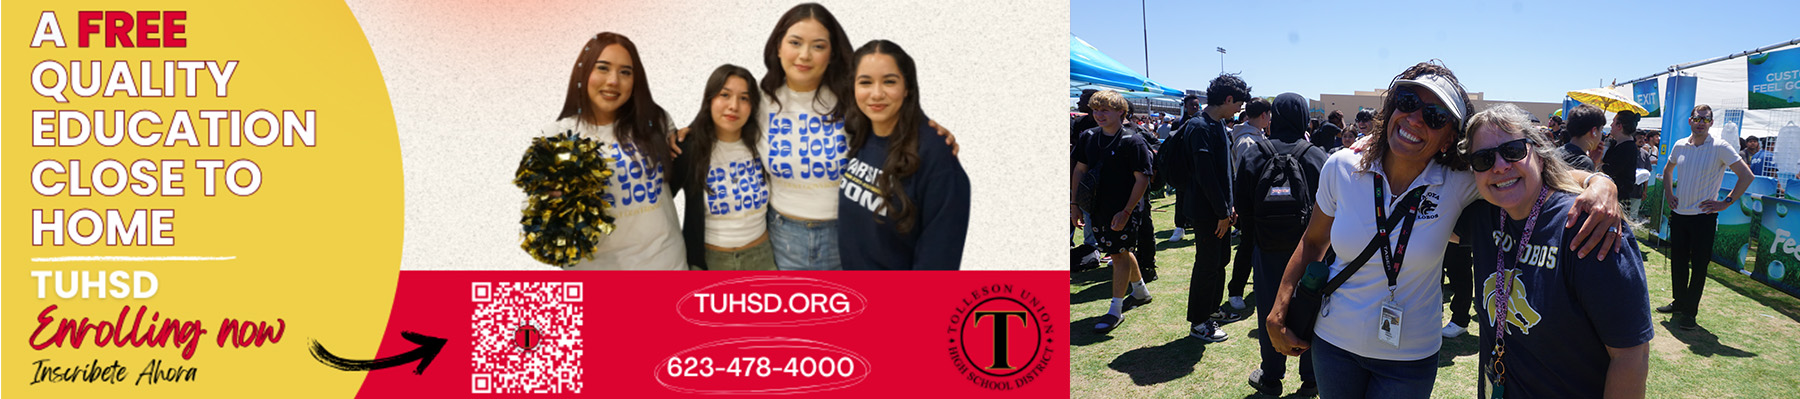 A free quality education close to home - TUHSD Enrolling now | Inscribete Ahora - tuhsd.org - 623-478-4000 | Two ladies outside at a school event